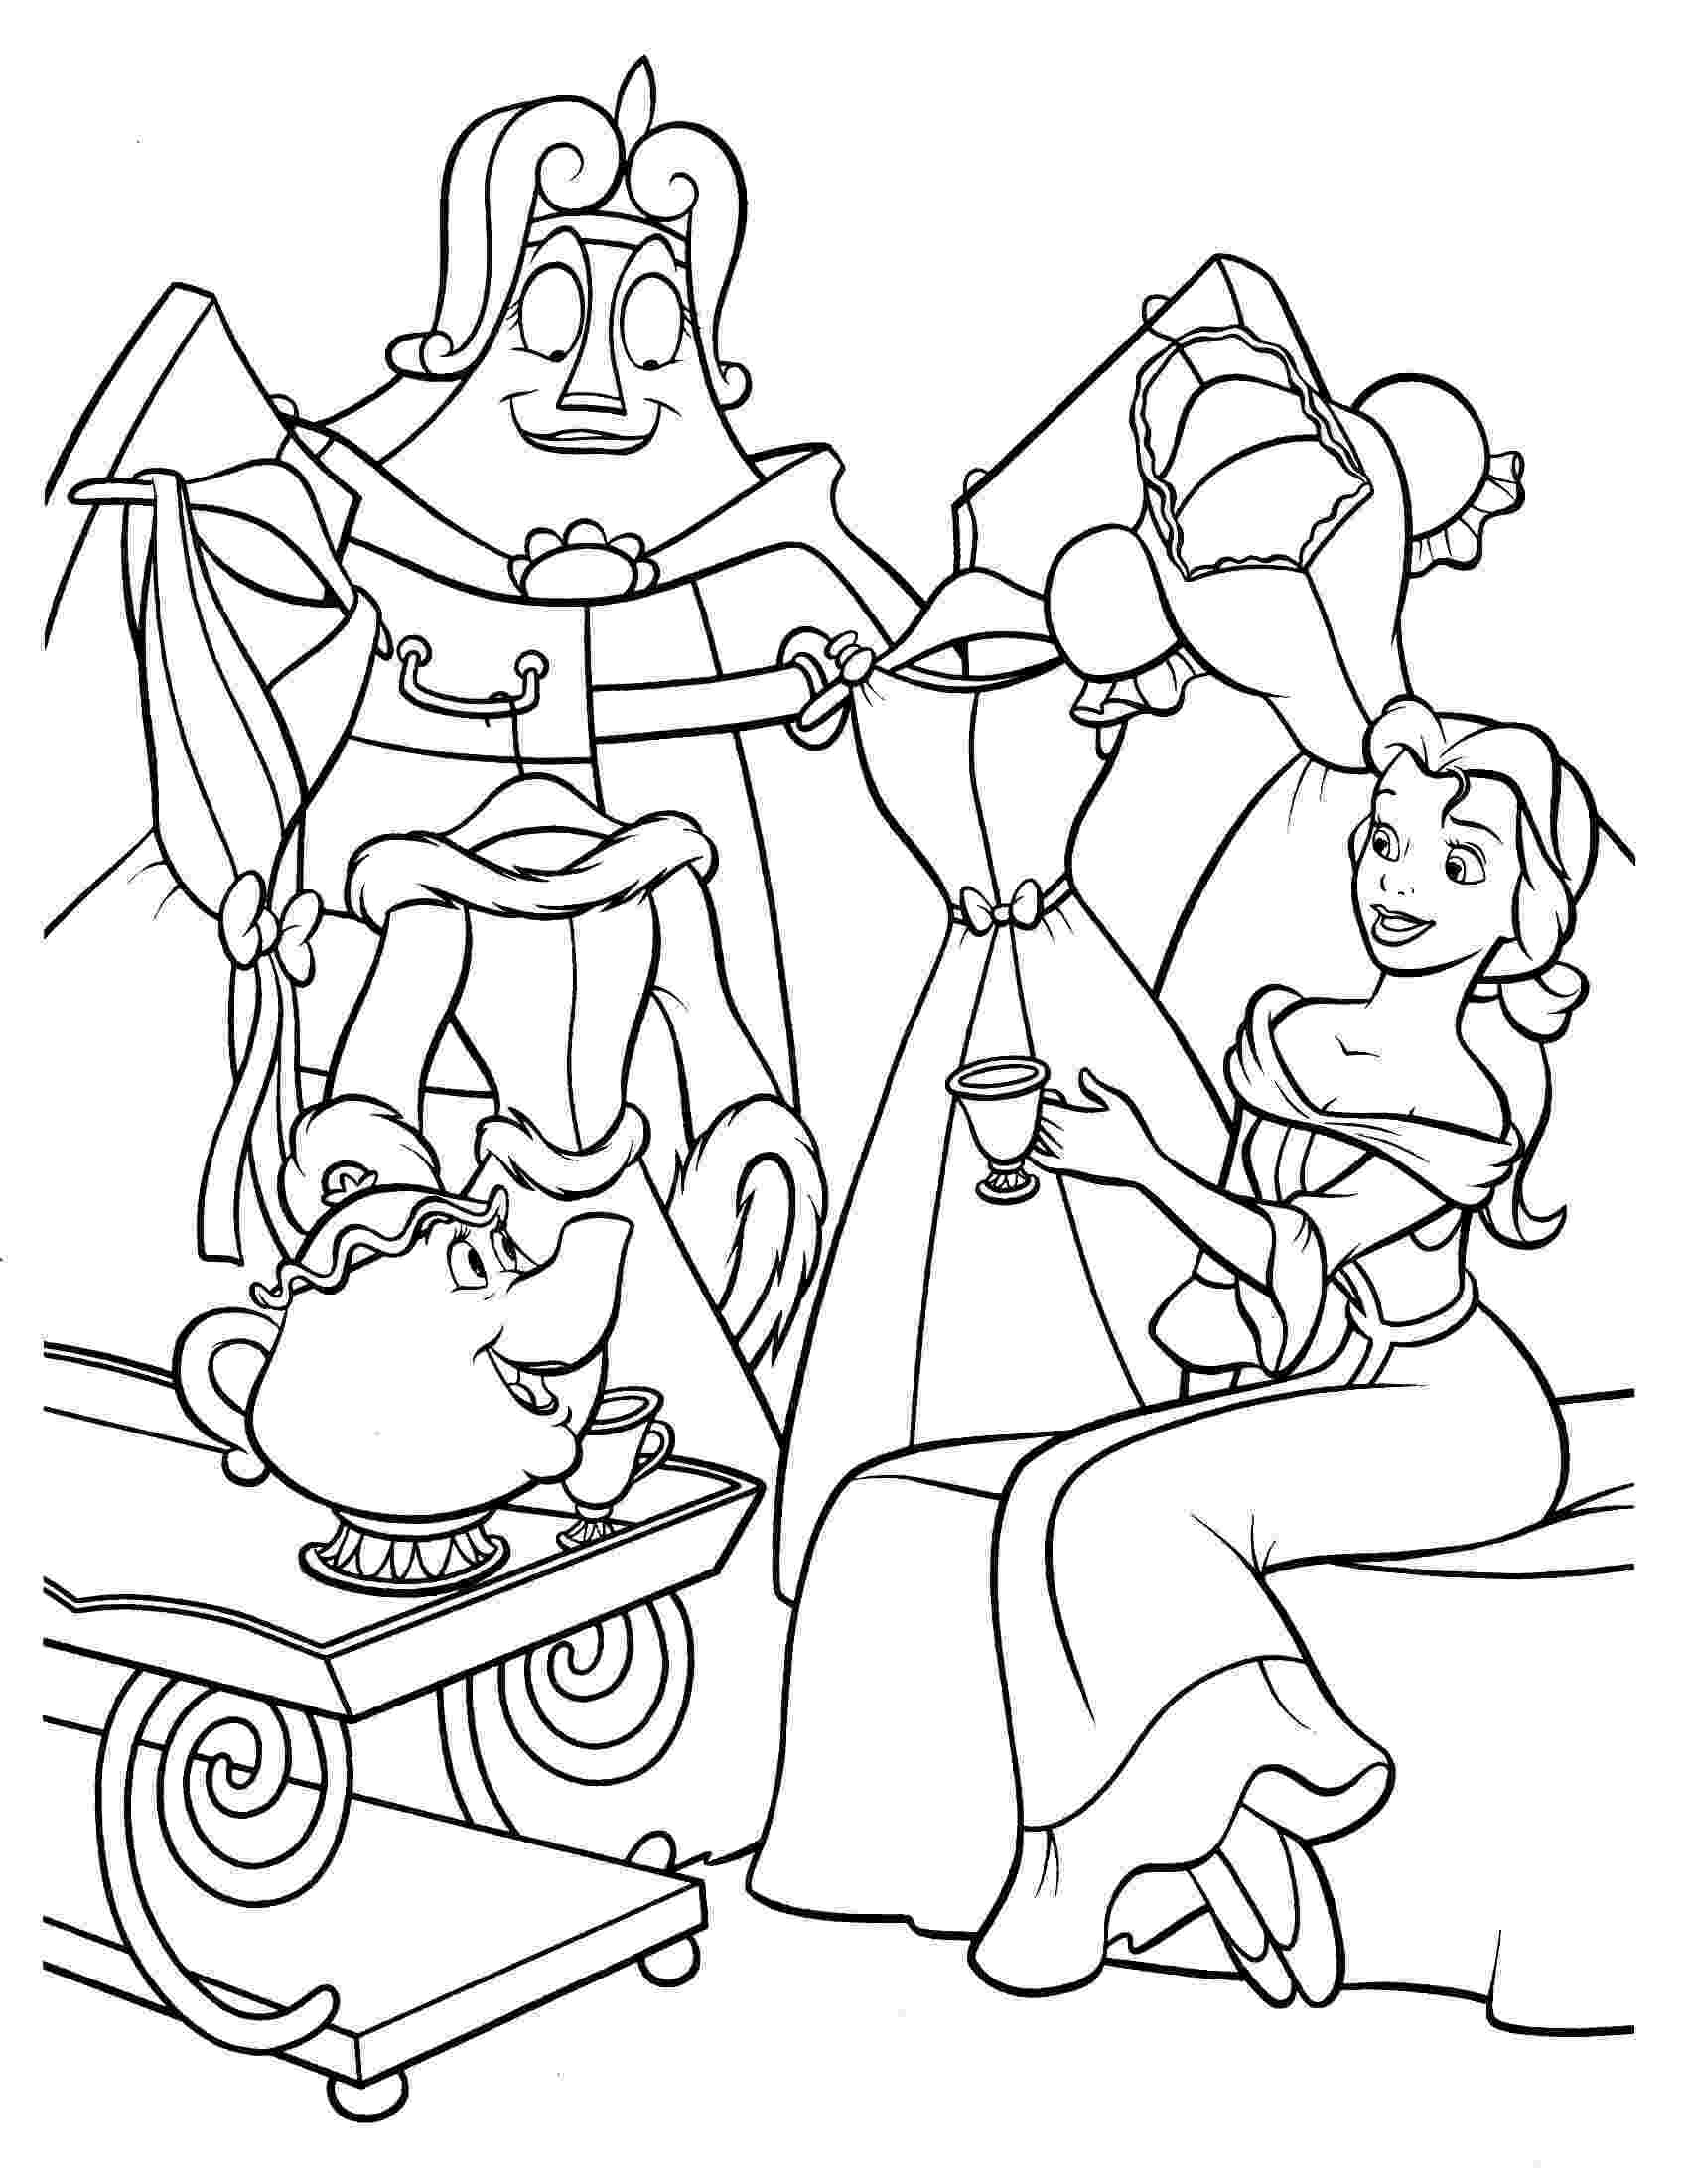 beauty and the beast coloring pages beauty and the beast coloring pages 2 disneyclipscom the beast and coloring beauty pages 